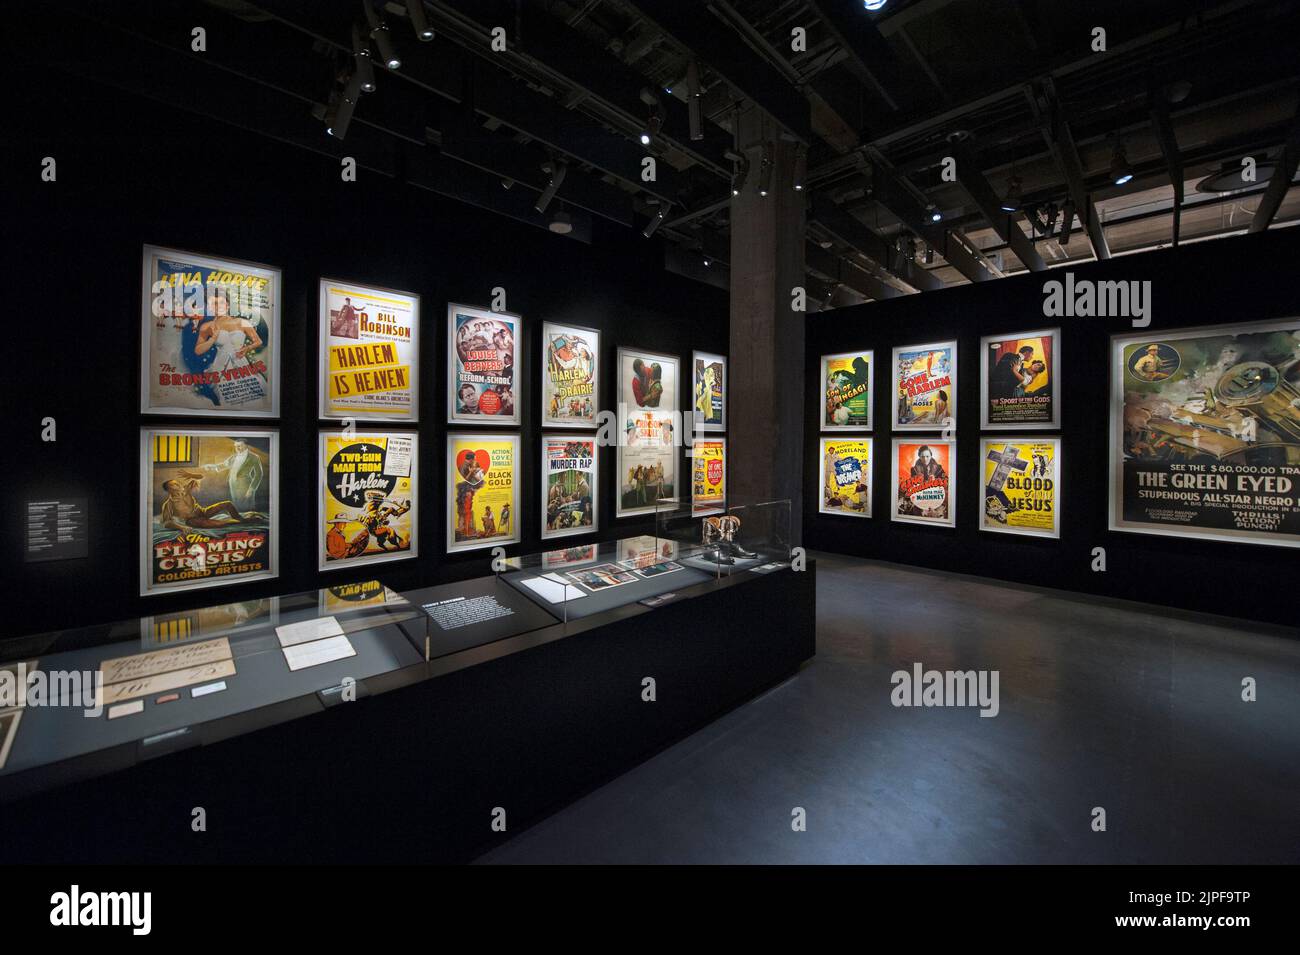 Vintage movie posters on display in the exhibtion 'Regeneration: Black Cinema' at the Academy Museum of Motion Pictures in Los Angeles, California Stock Photo